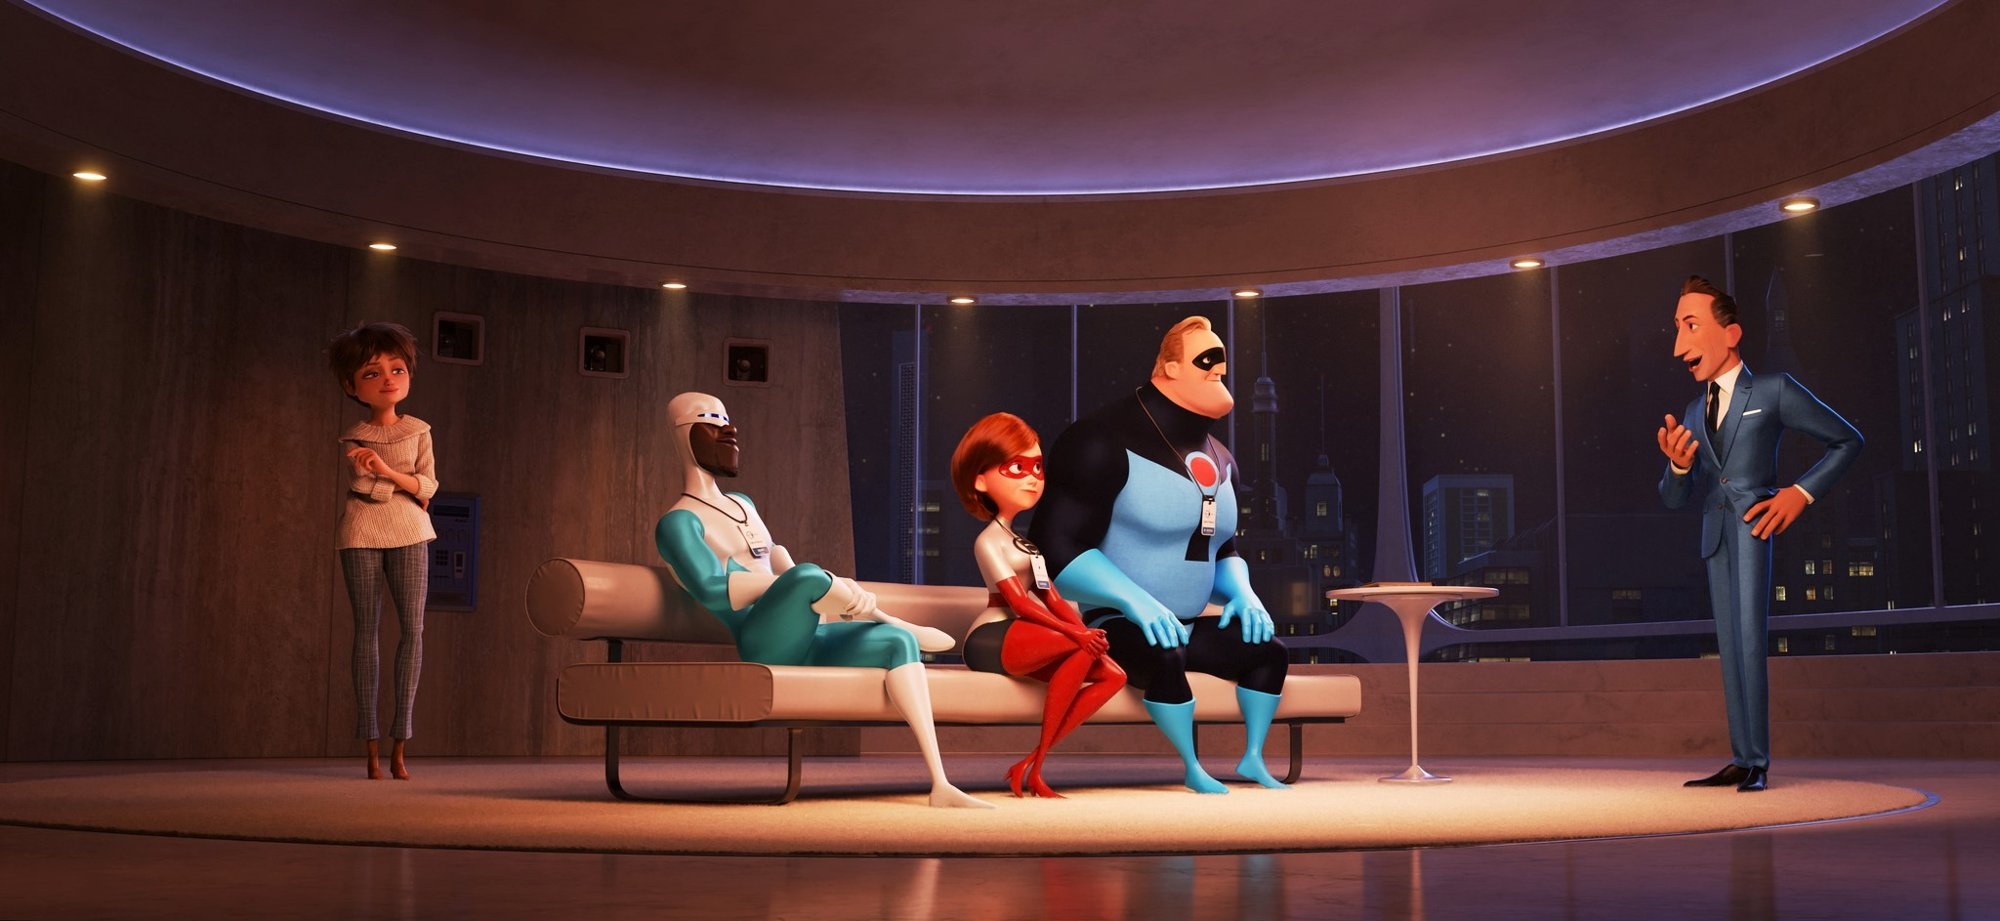 free for ios instal Incredibles 2